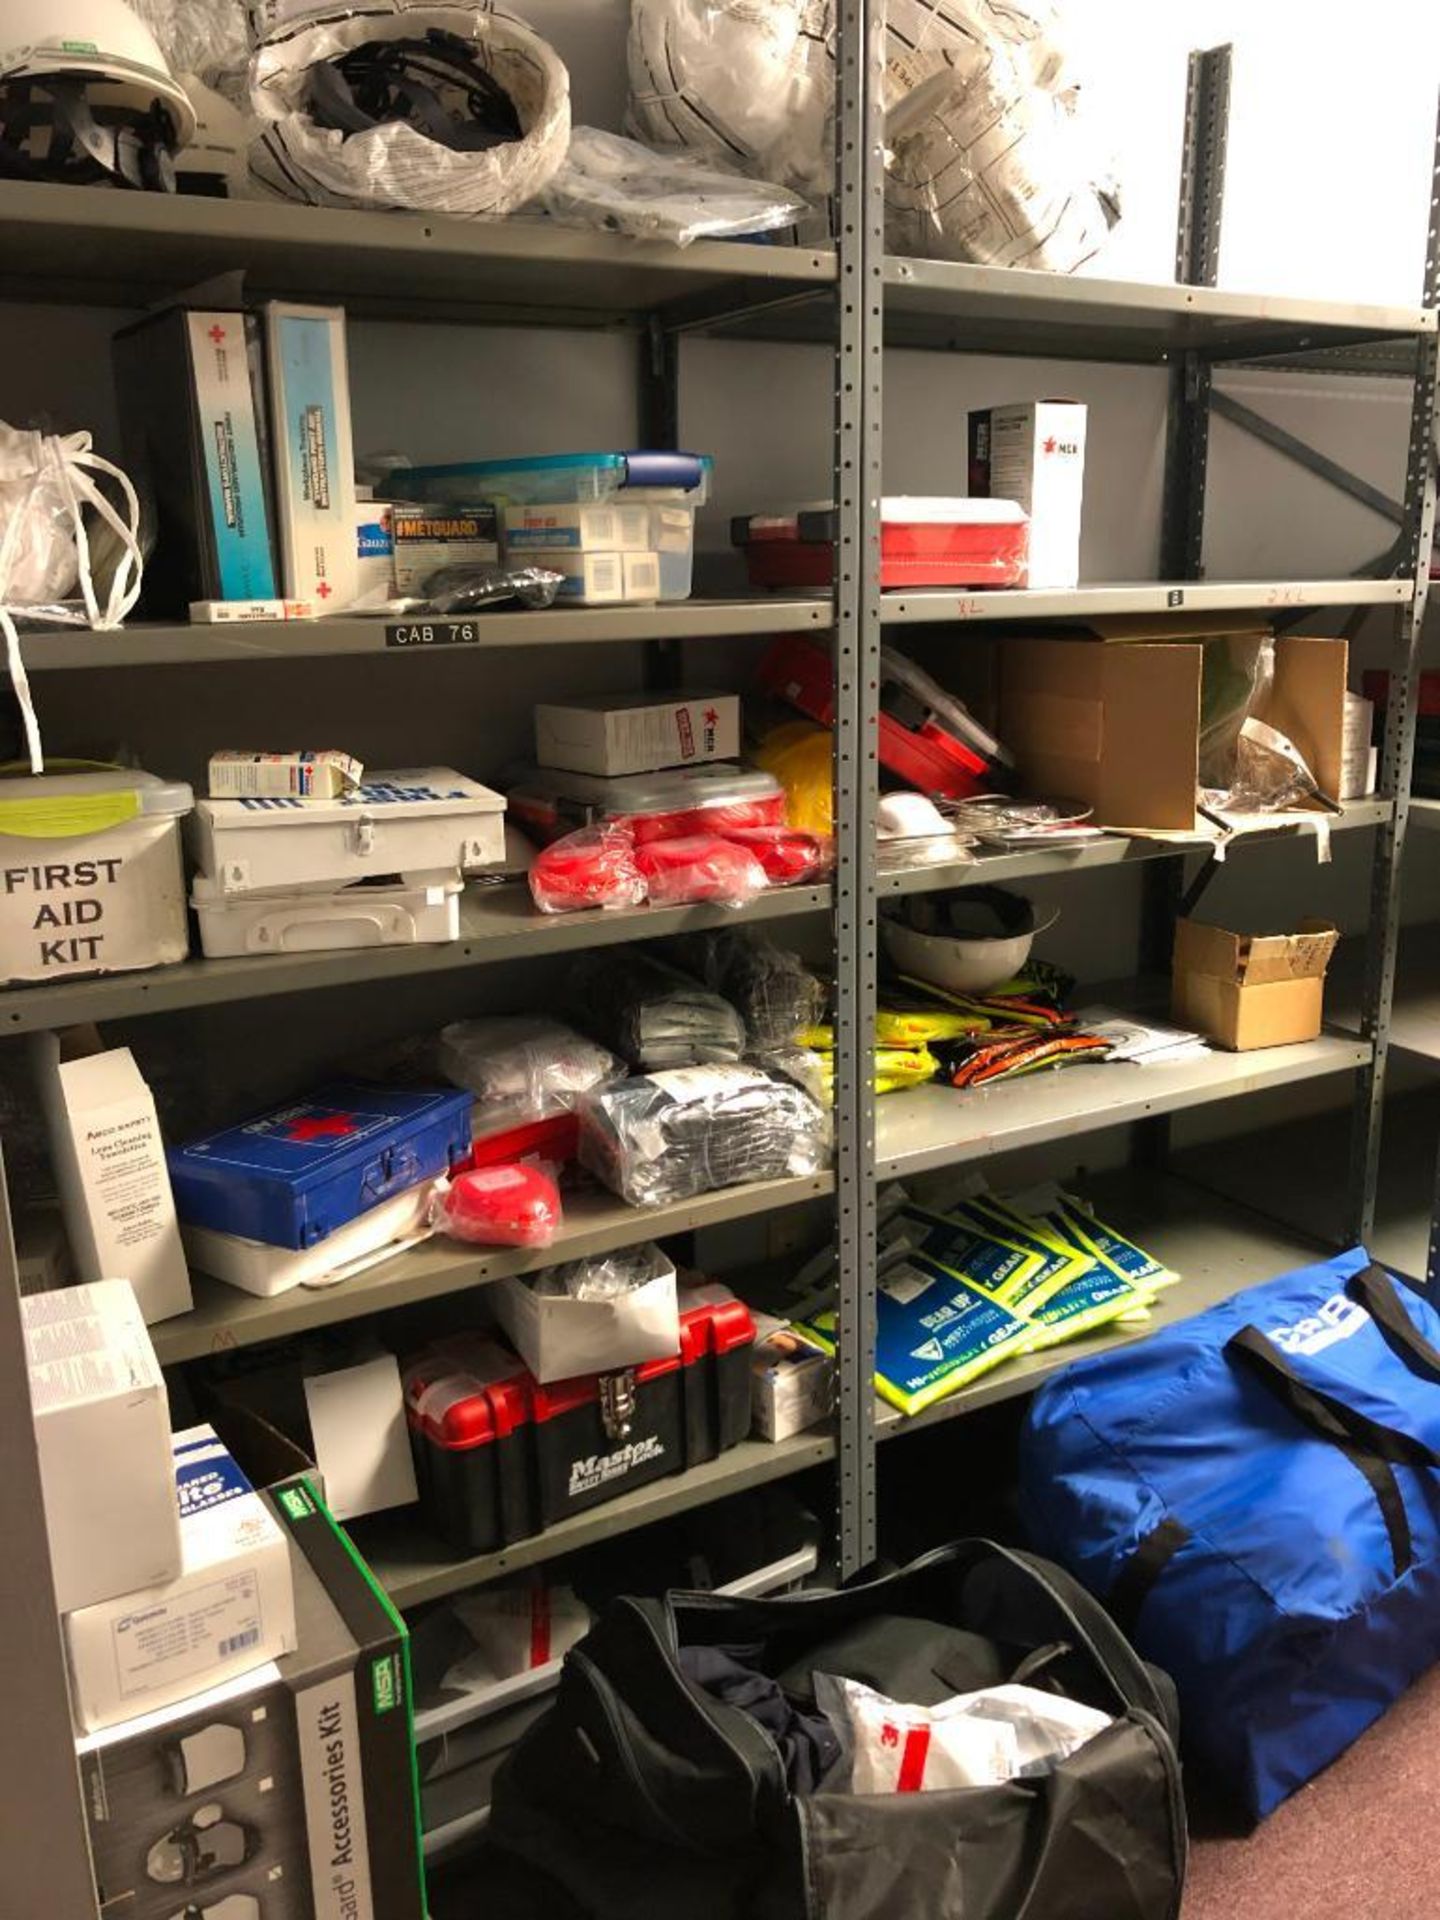 (2) SHELVES AND CONTENT: HARD HATS, FIRST AID KITS, SAFETY VEST, CPR DUMMY, MASKS, GLOVES, SAFETY GL